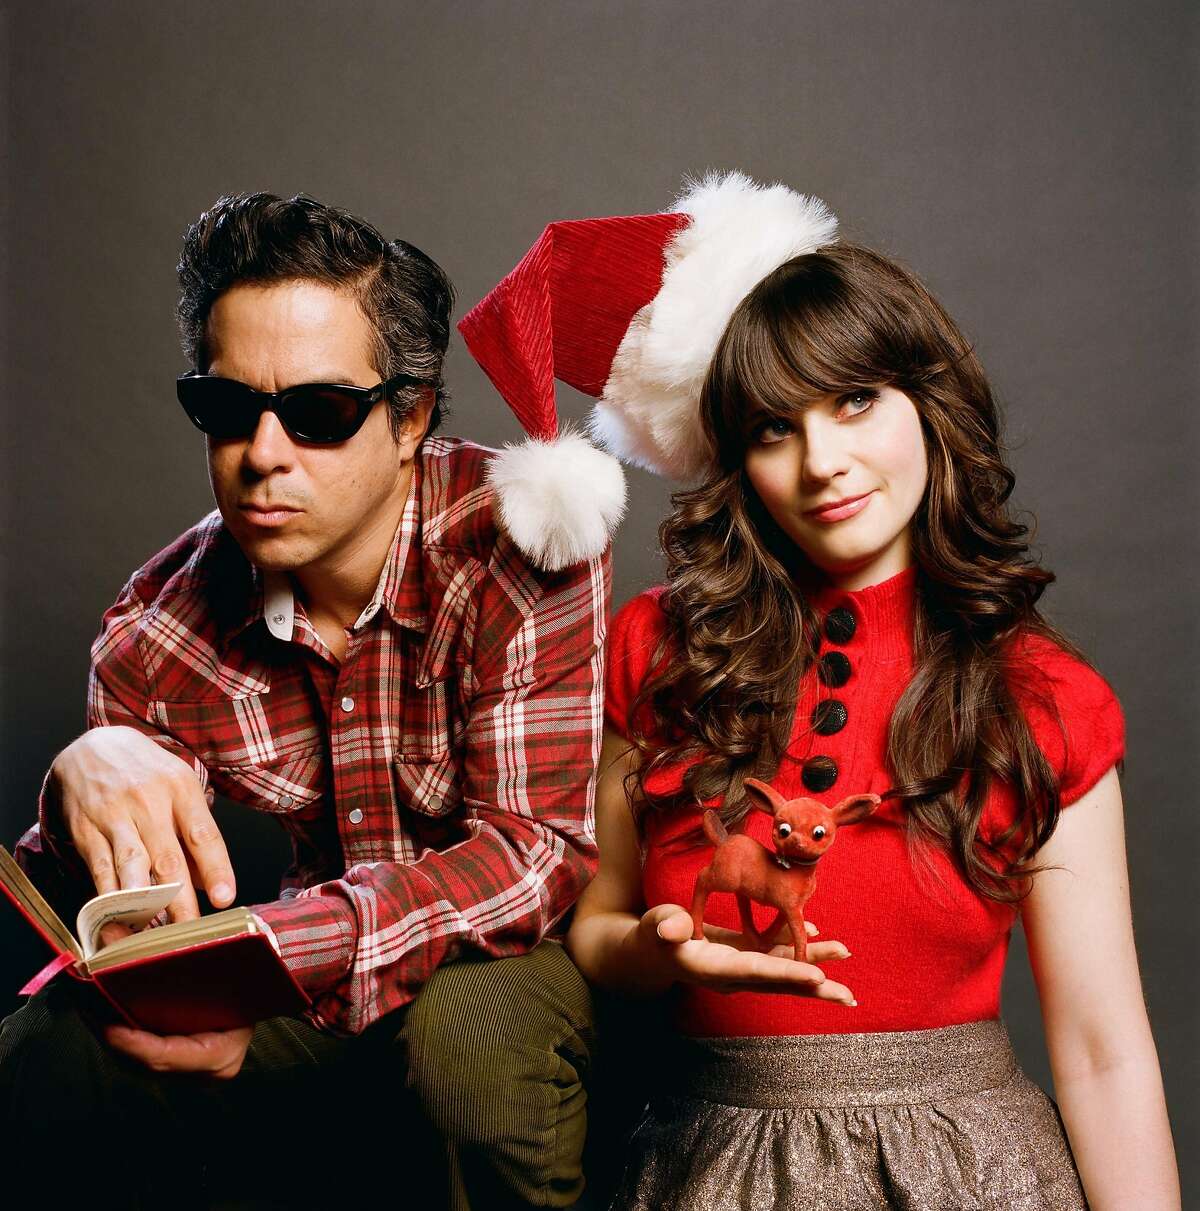 She and Him: M. Ward and Zooey Deschanel.